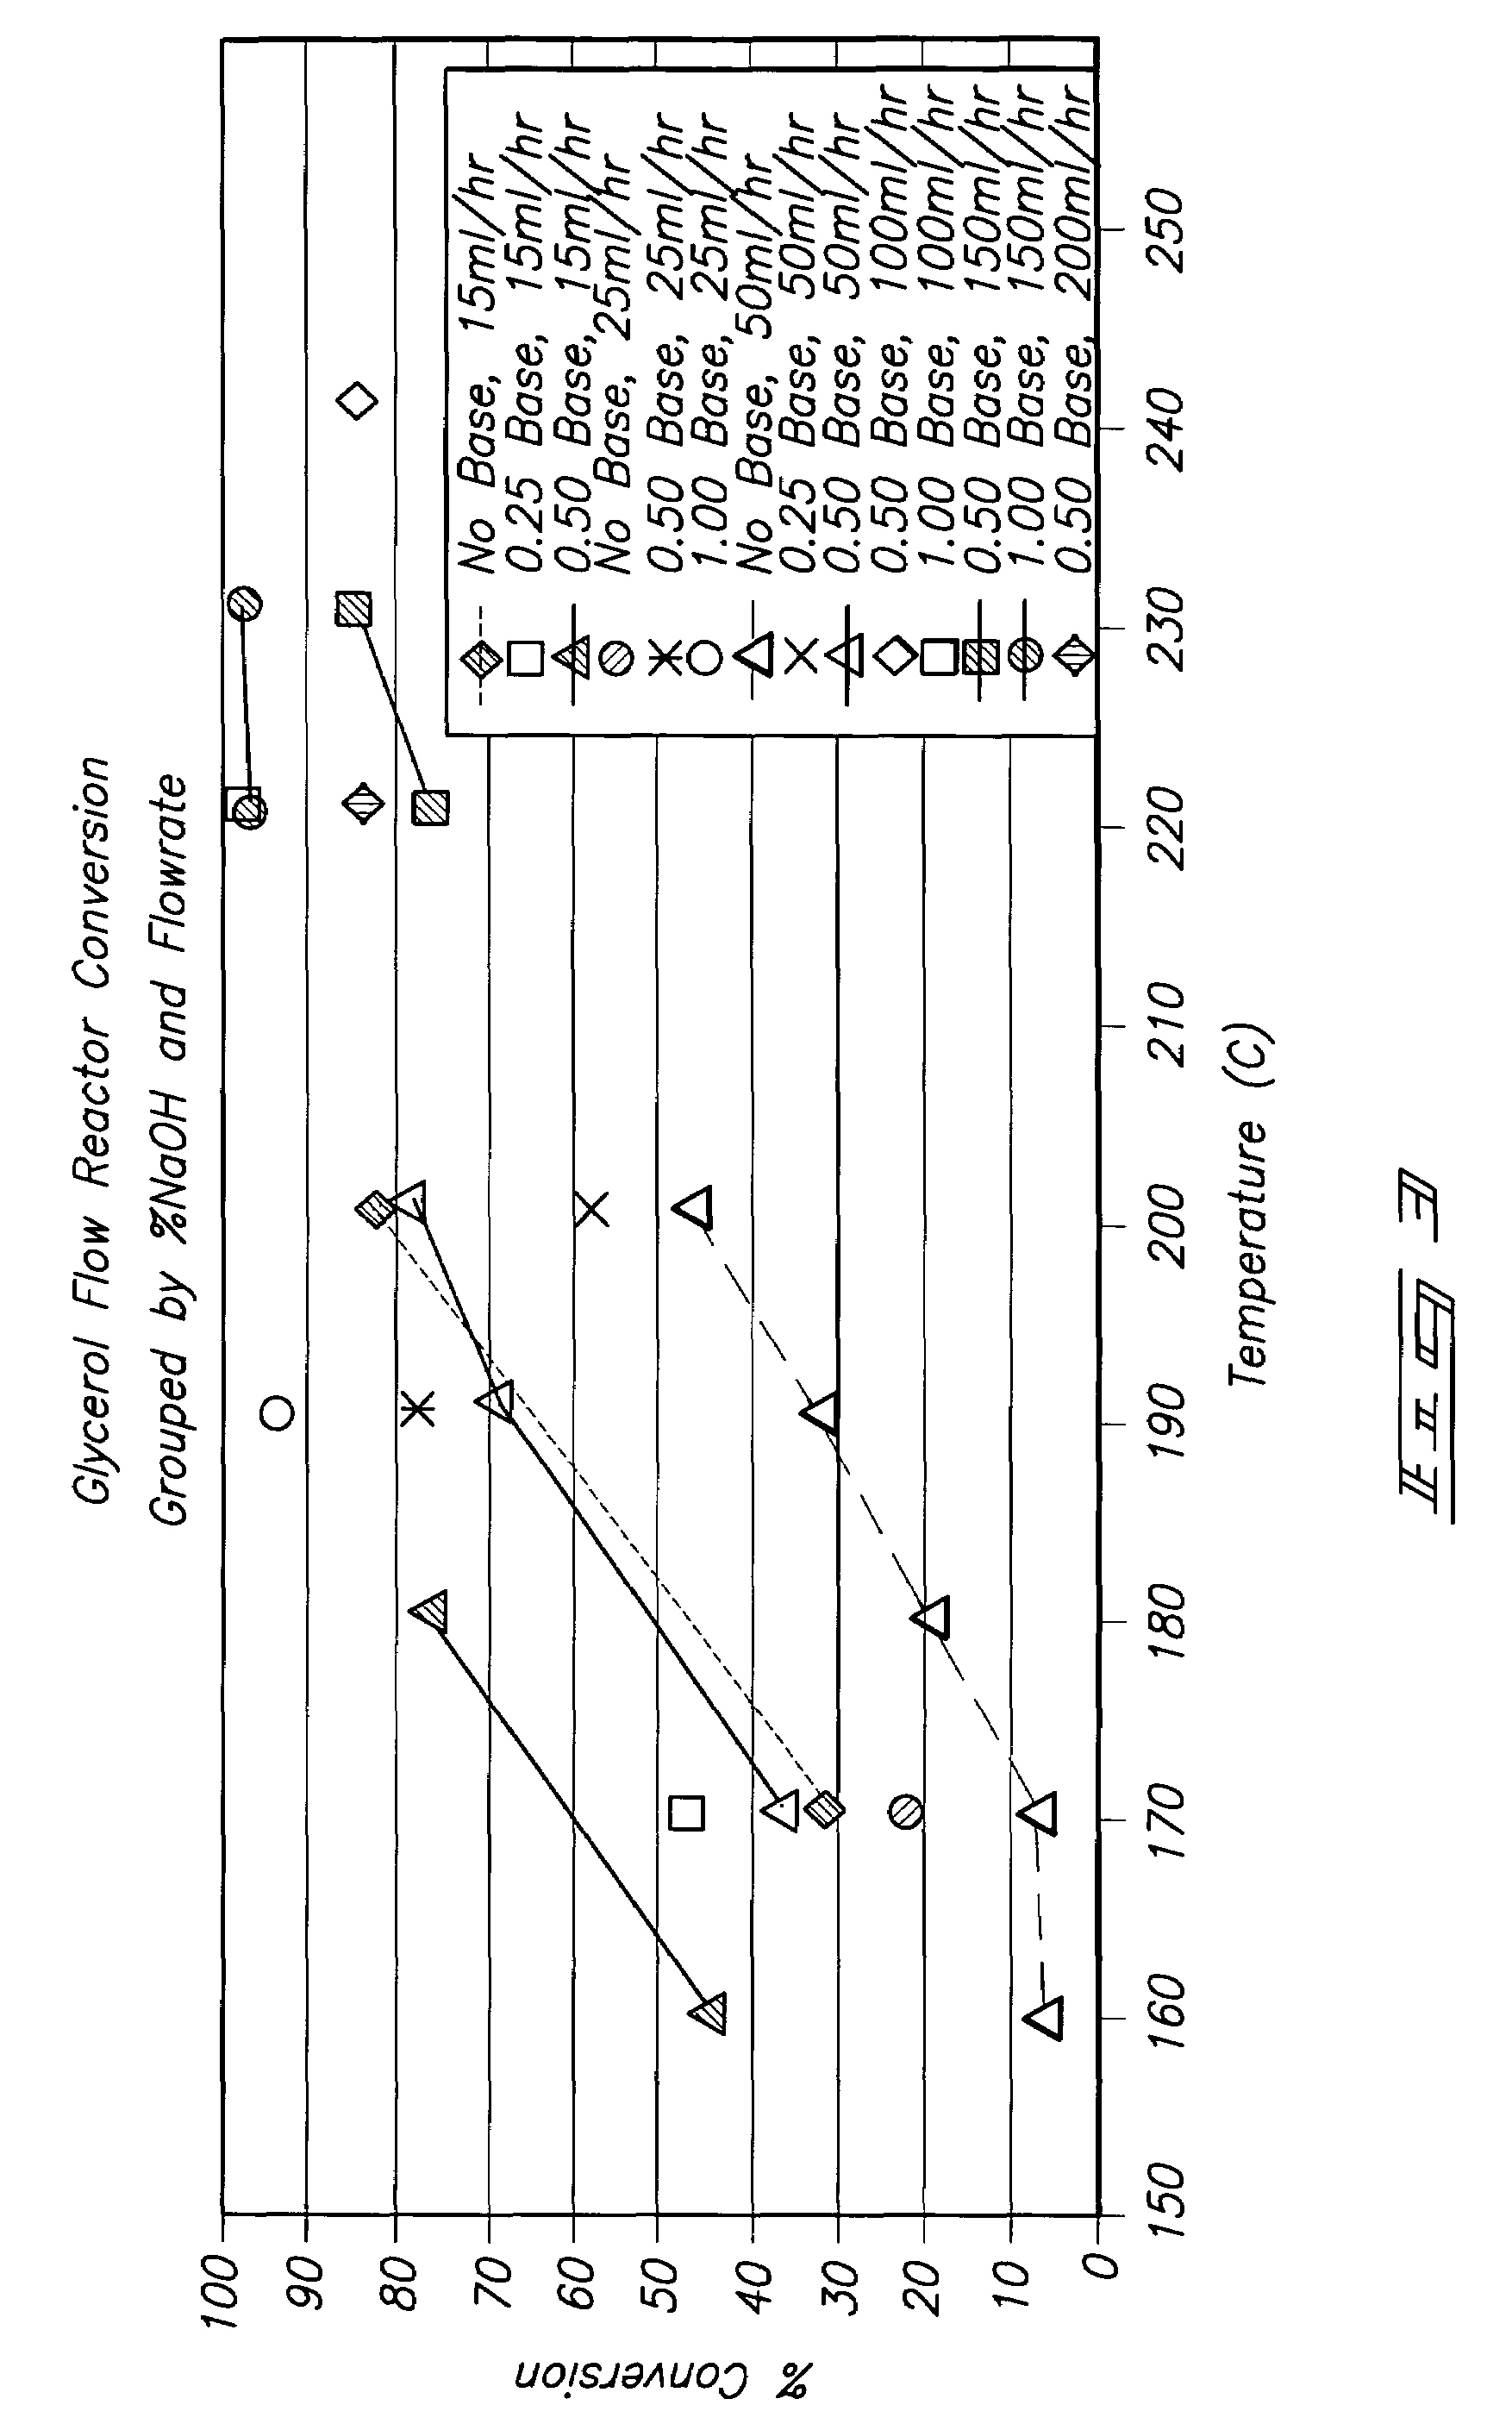 Hydrogenolysis of 5-carbon sugars, sugar alcohols, and methods of making propylene glycol